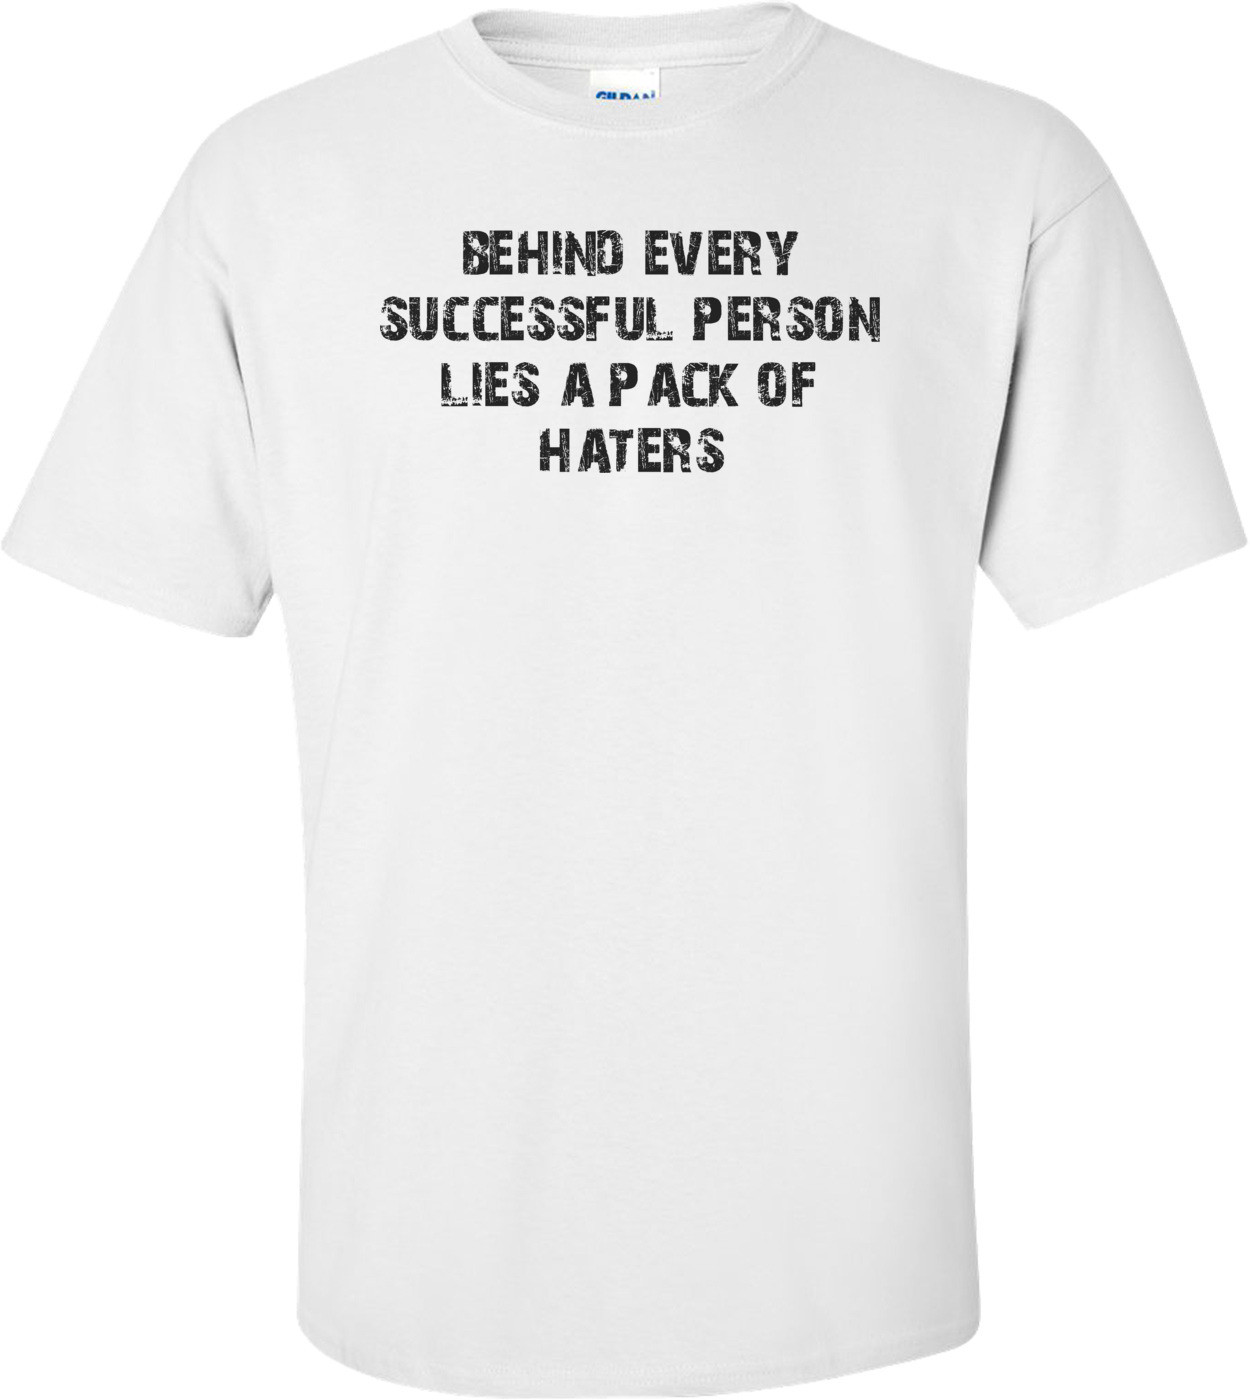 behind every successful person lies a pack of haters Shirt